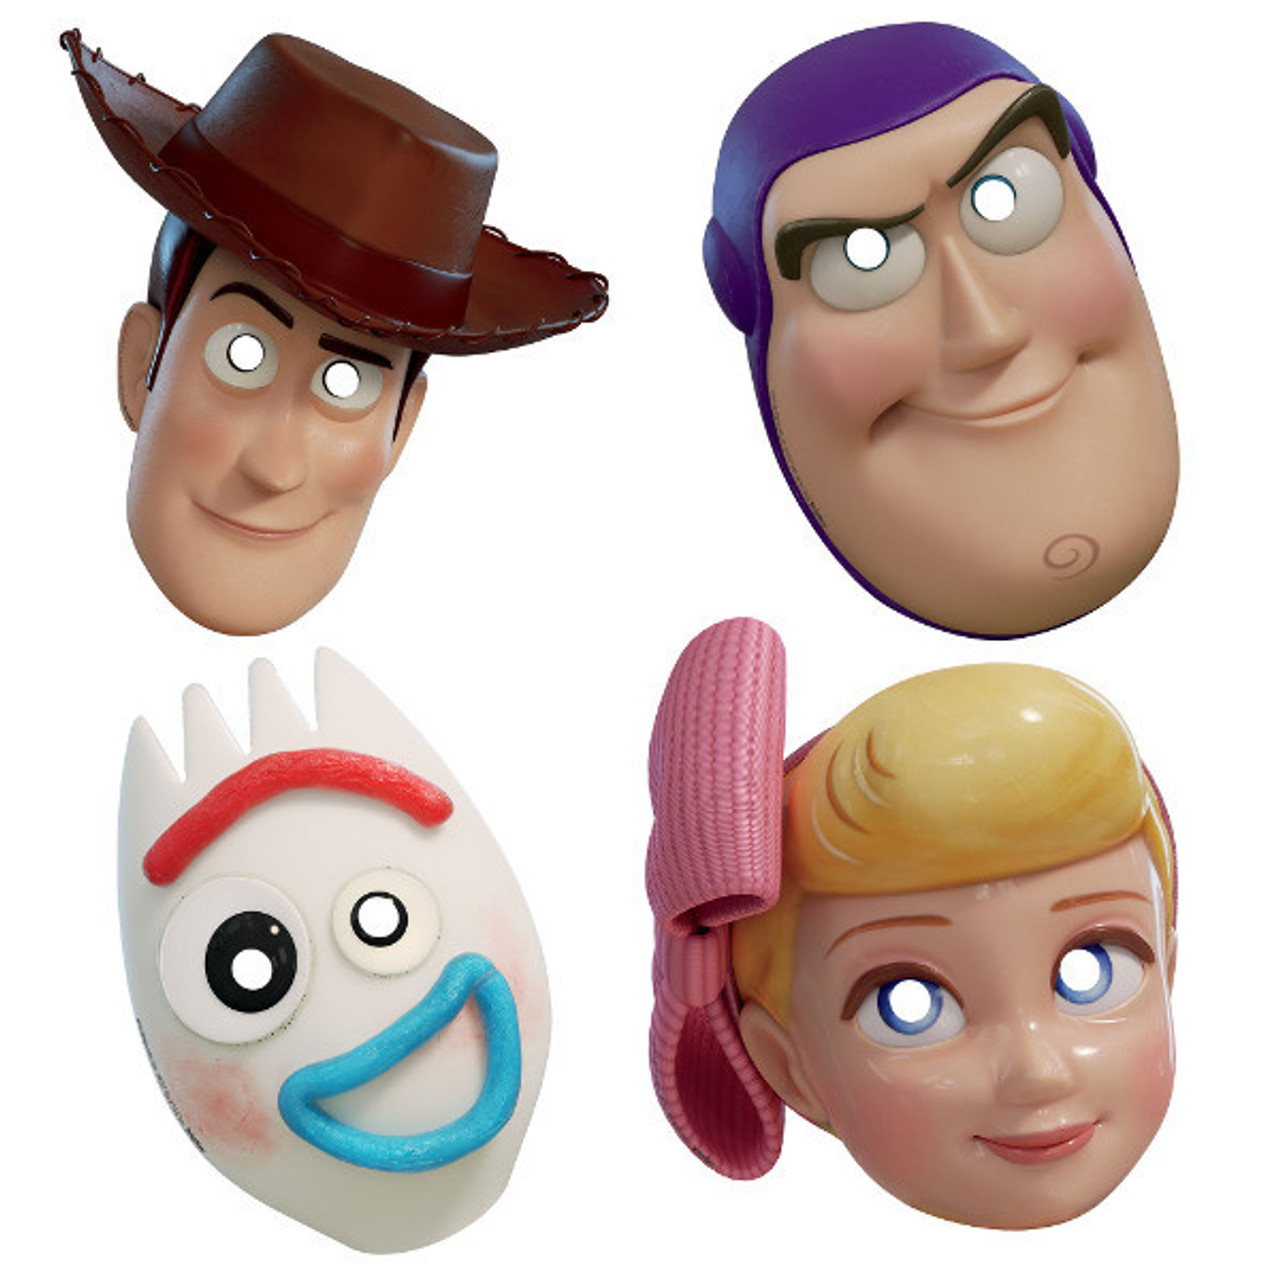 Toy Story 4 Paper Masks - Party Time, Inc.